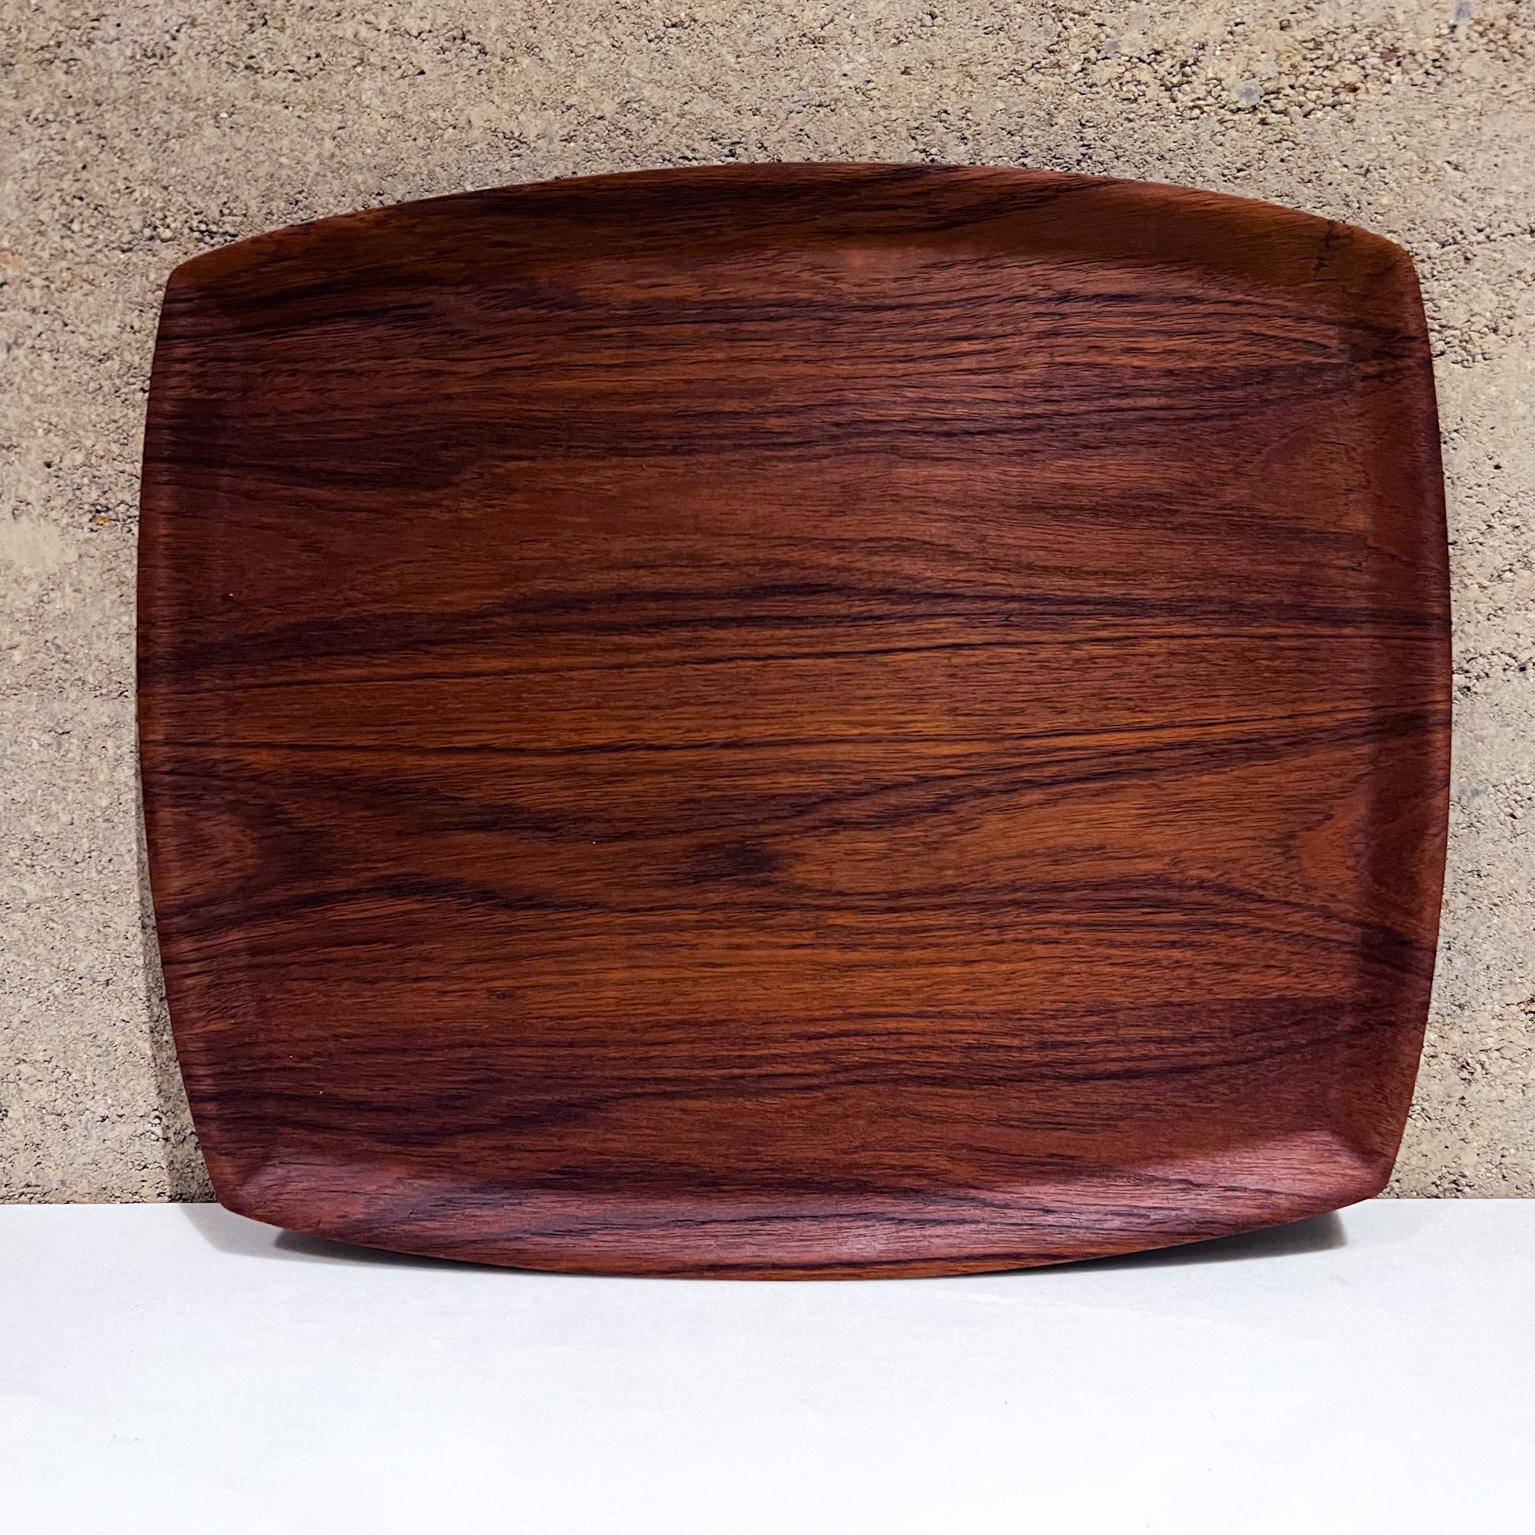 1960s Wood Teak Tray from Sweden Style Jens Quistgaard In Good Condition For Sale In Chula Vista, CA